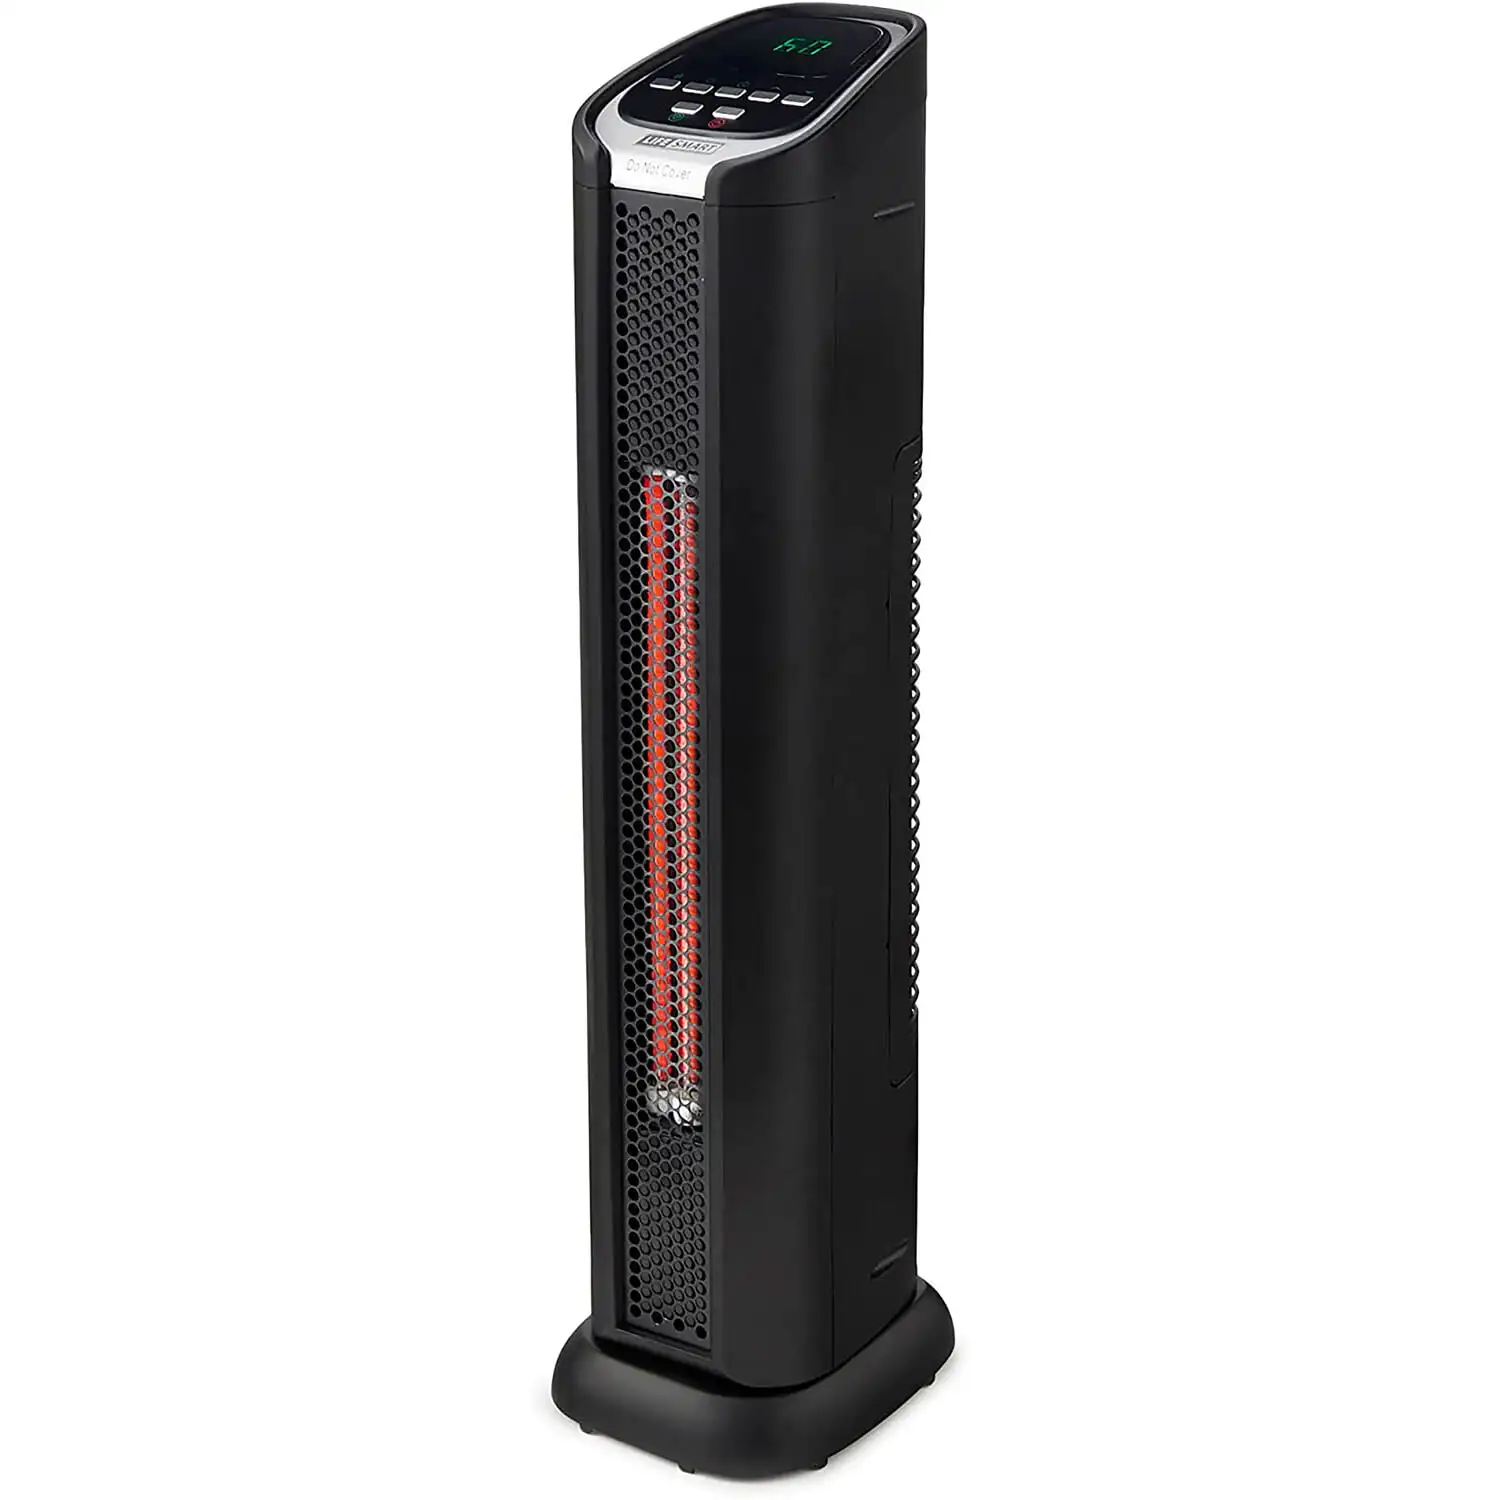 24-In. Infrared PTC Oscillating Tower Heater with Remote Control | 12-Hour Timer | LED Display | Washable Filter | 3 Heat Settin